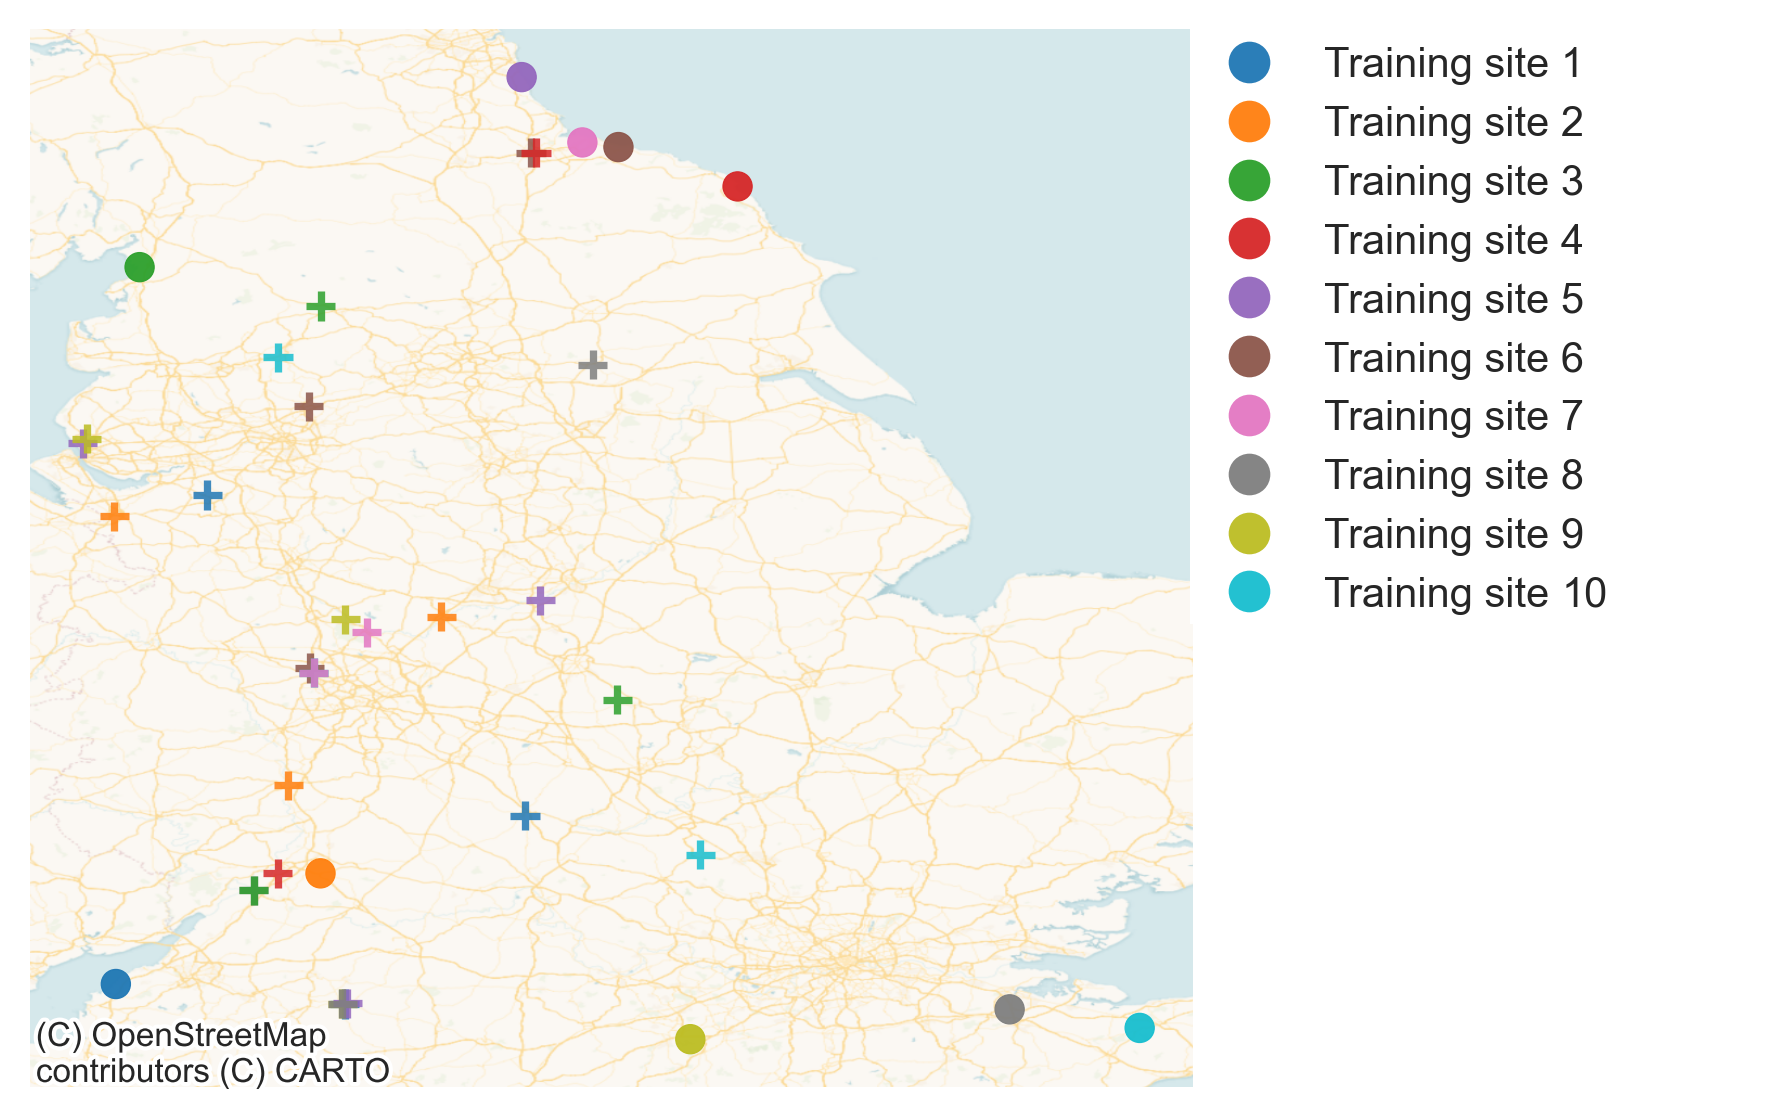 Figure 24: New sites similar to the training sites.